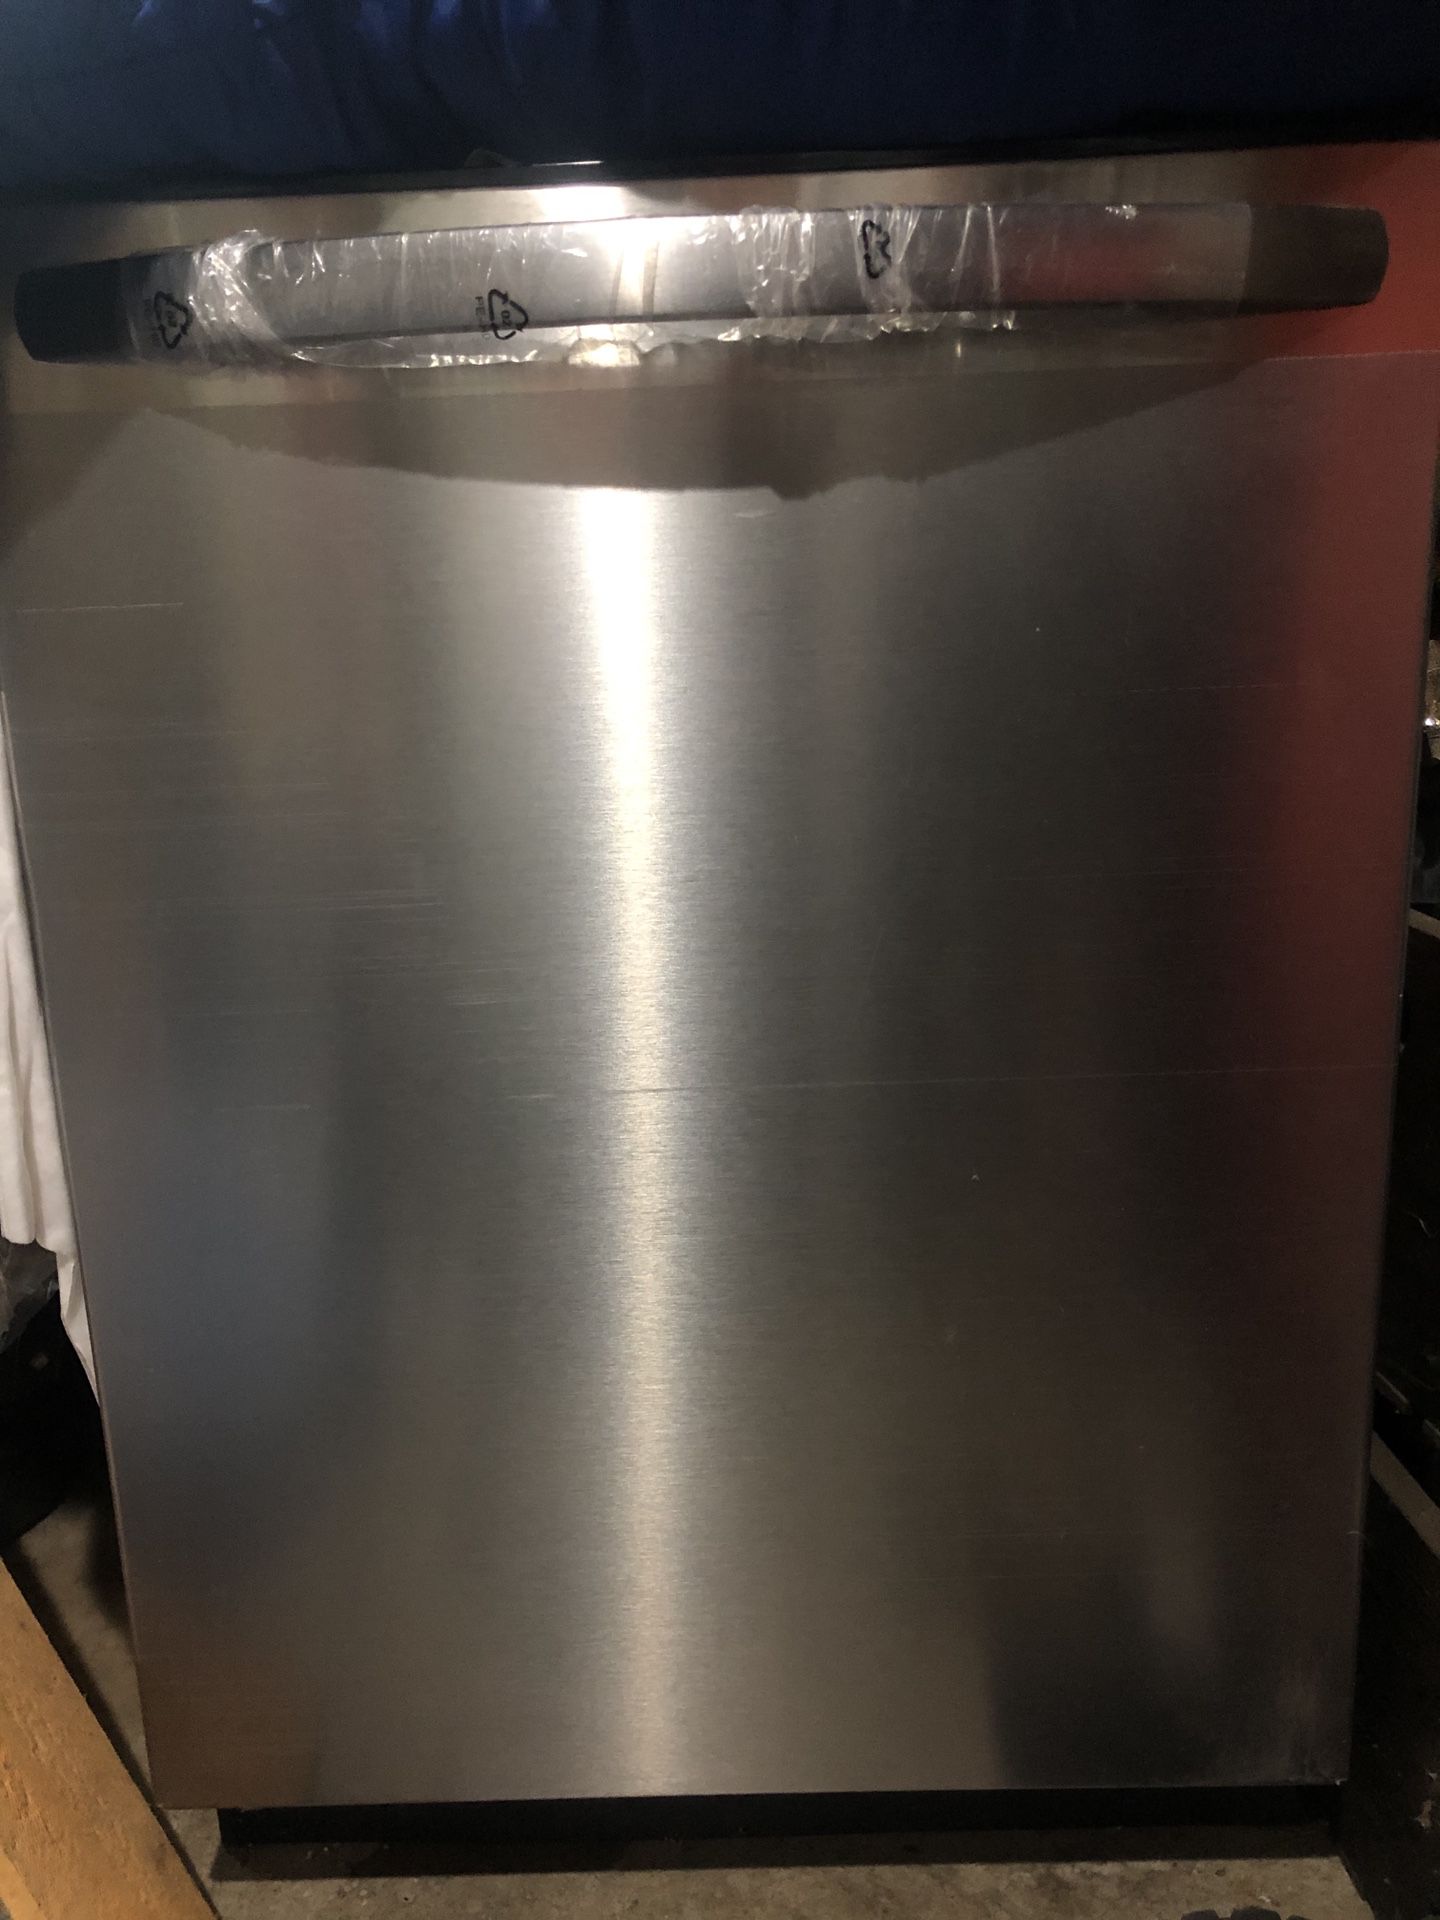 Brand new never used Frigidaire stainless steel dishwasher, pickup only